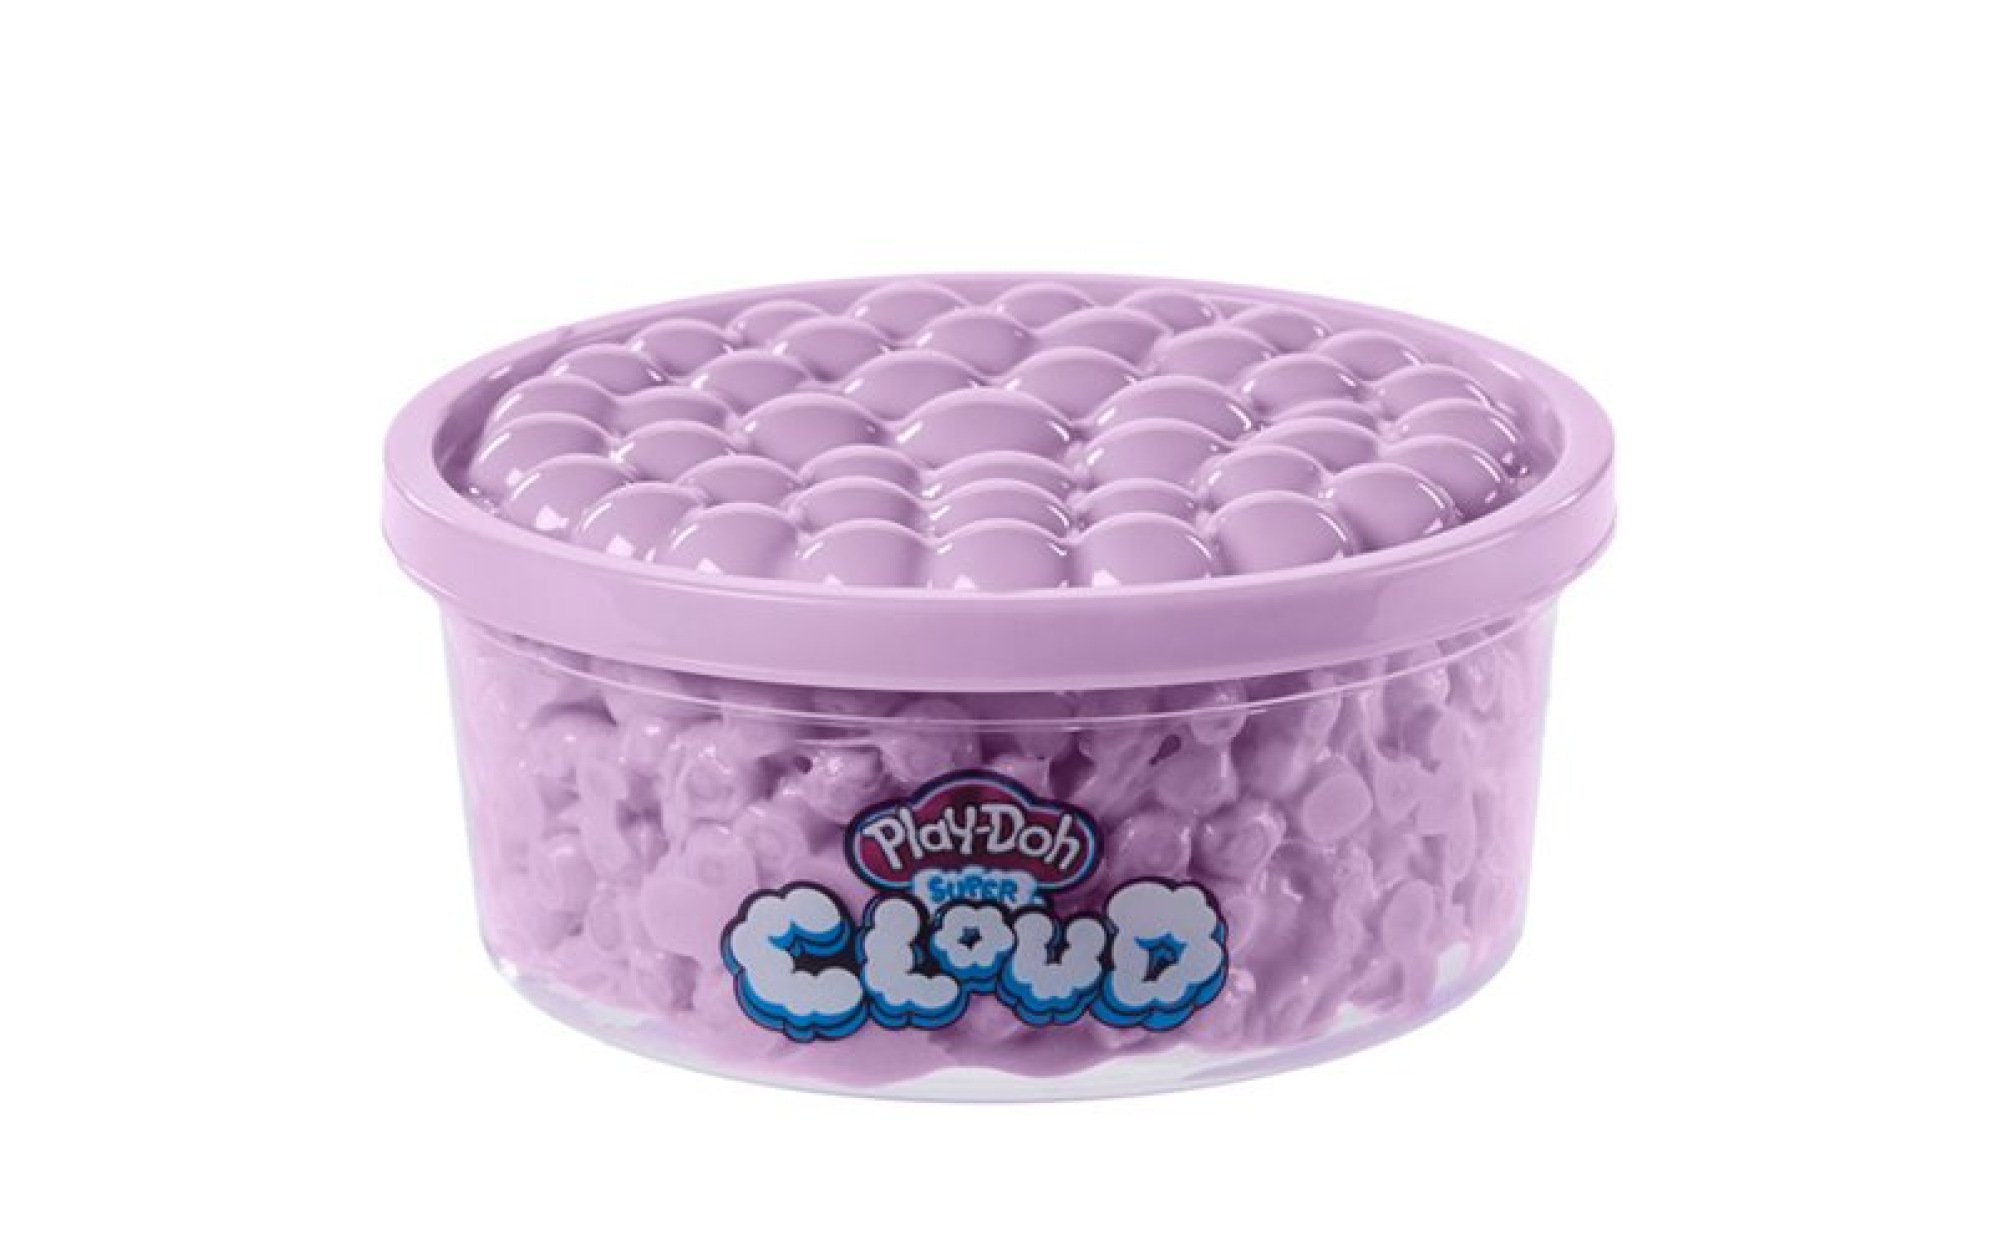 Crayola Play Dough in Play Doughs, Putty & Sand